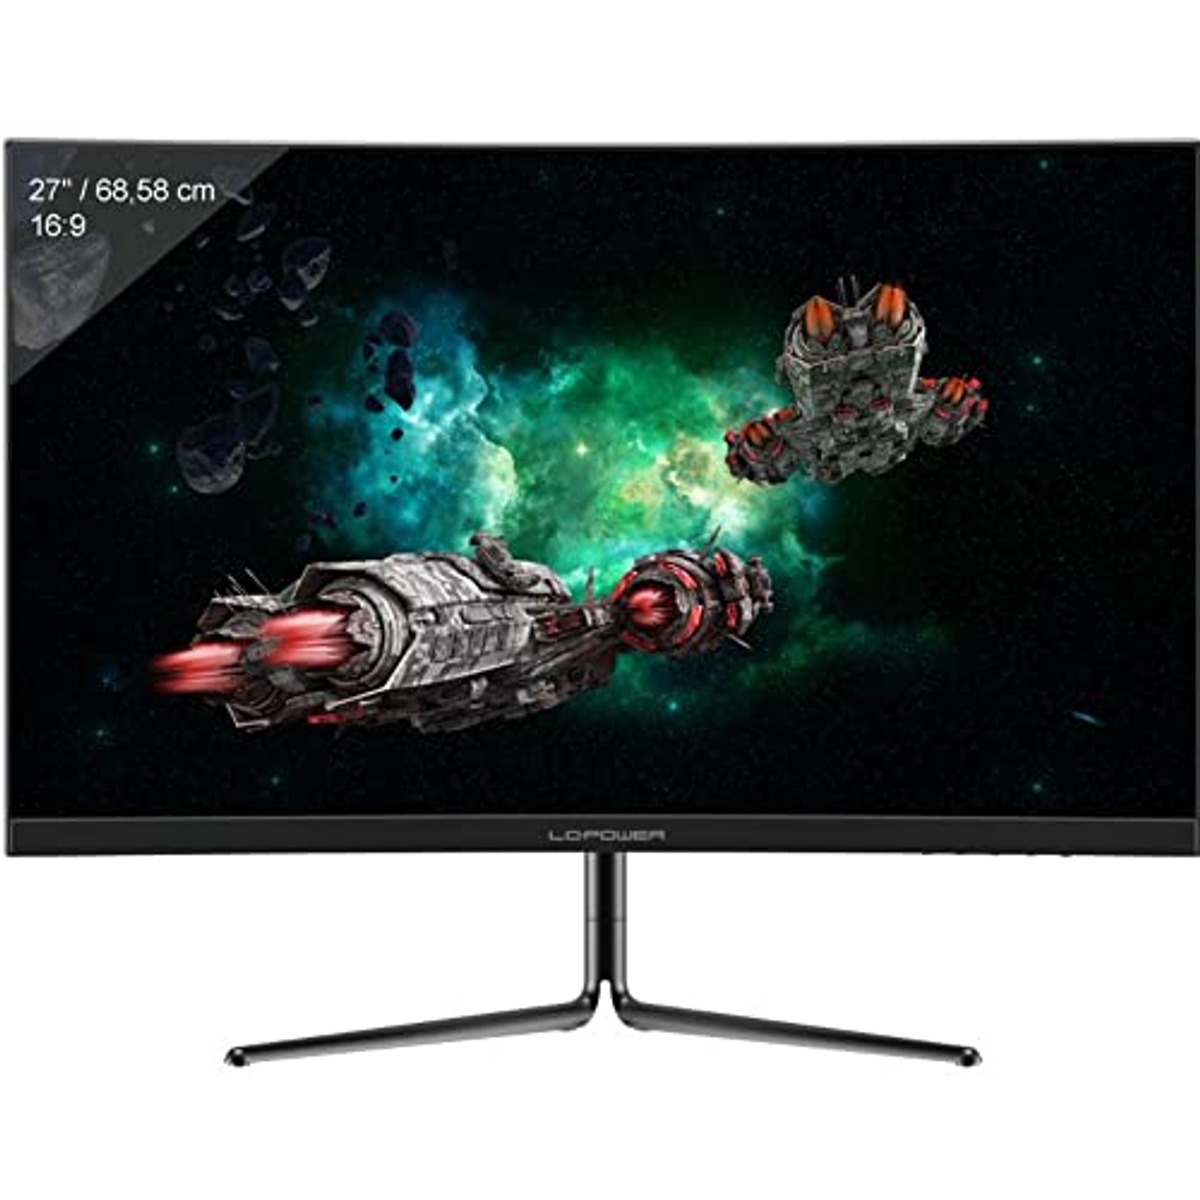 LC POWER Reaktionszeit 27 165 ms nativ) (1 Full-HD Monitor, Hz Zoll , , Gaming-Monitor LC-M27-FHD-165-C-V2 165 Hz